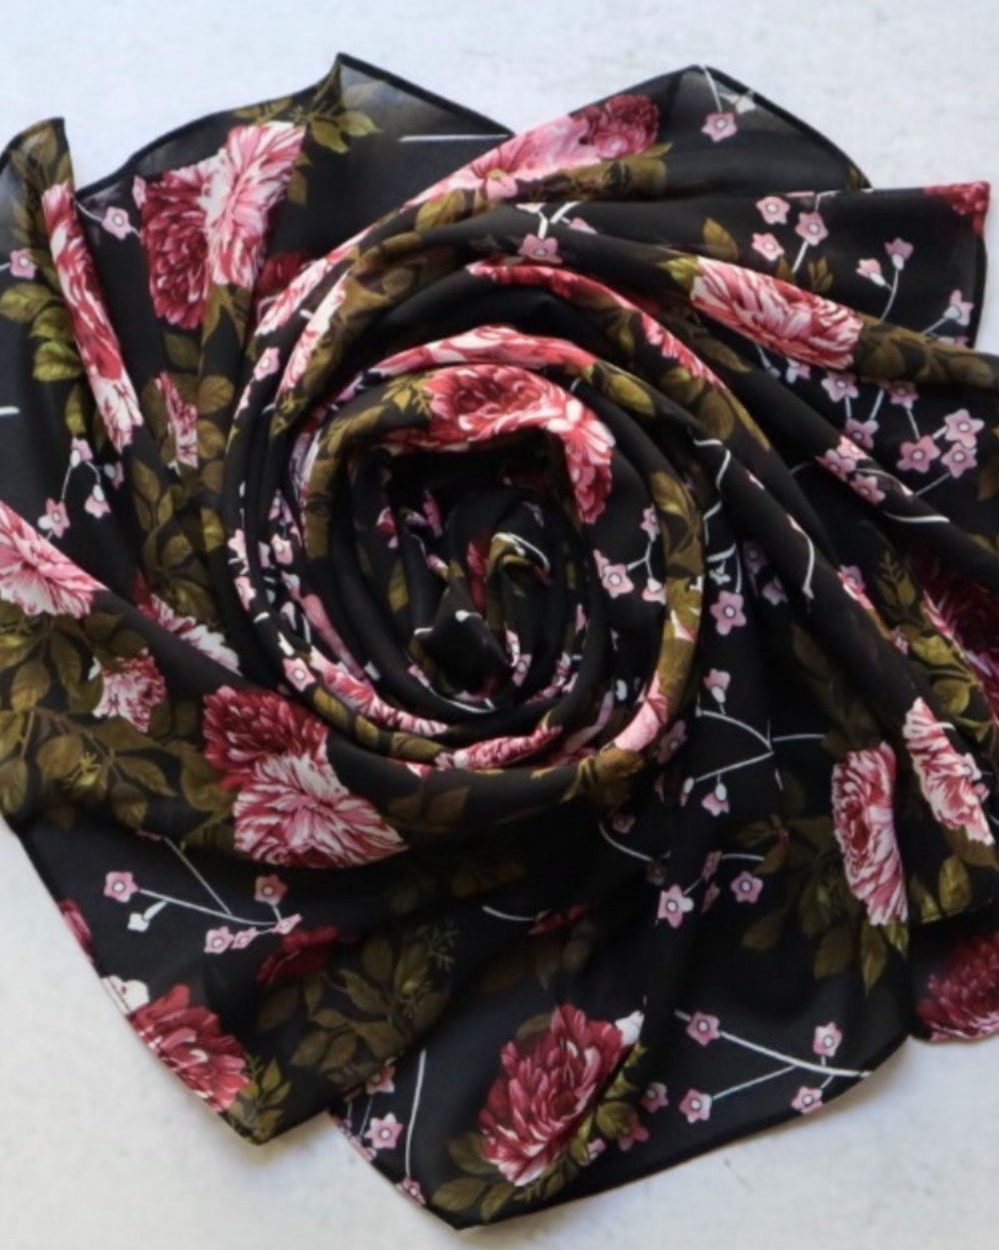 Shop Printed Chiffon Square Hijabs - Black and Pink Floral Online | Modesty Hut